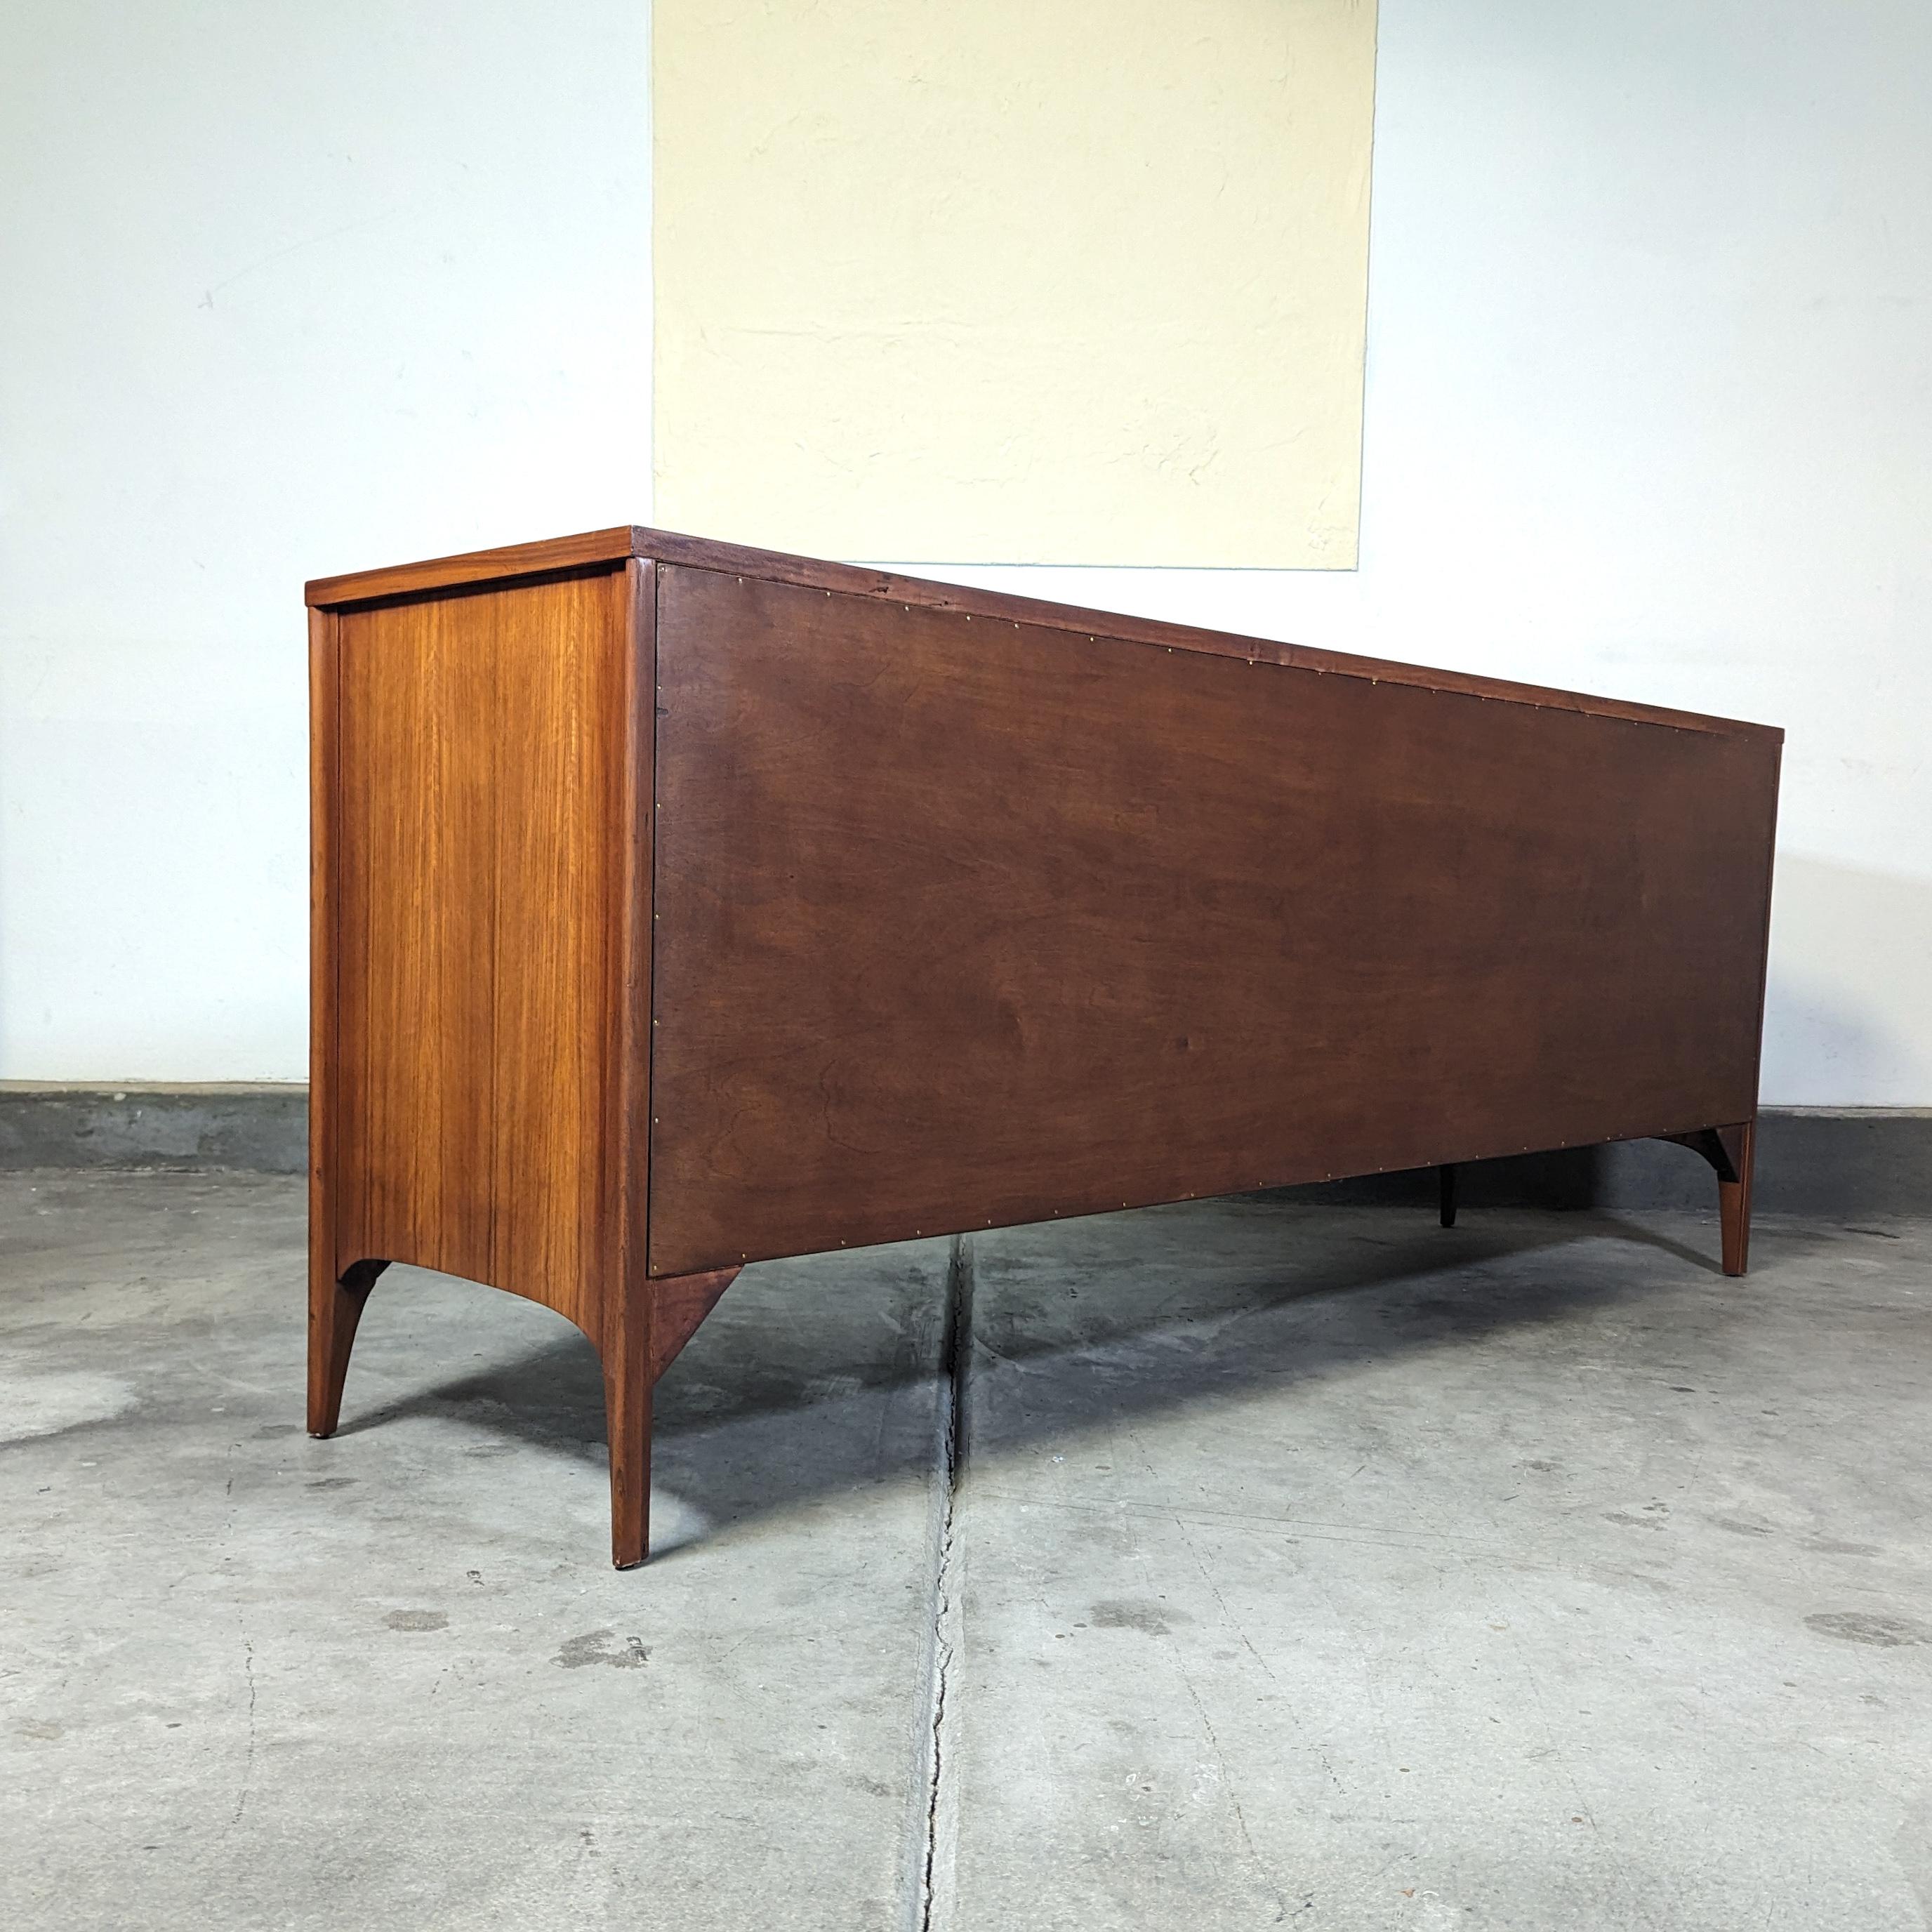 Step into the world of mid-century elegance with this exquisite Kent Coffey Lowboy Dresser from the Perspecta line, circa 1960s. Masterfully restored to its original splendor, this piece radiates sophistication and charm, boasting an expansive form